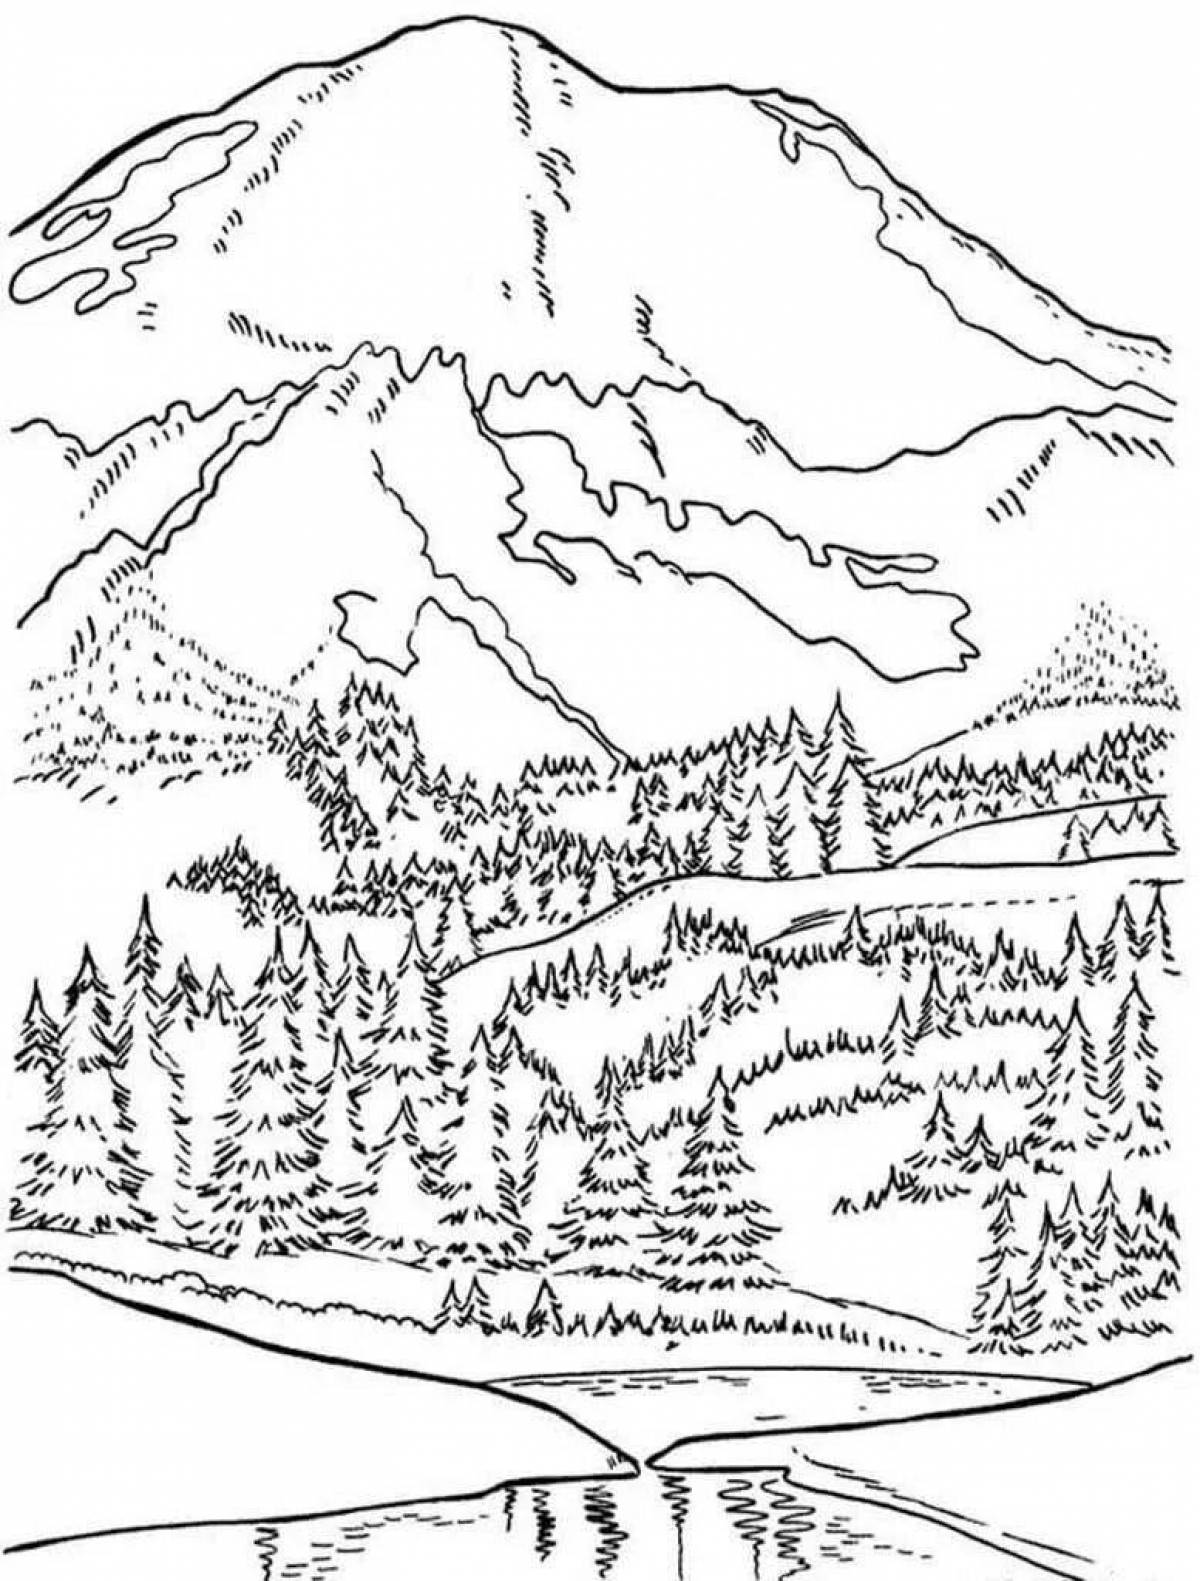 Vivid mountains coloring book for kids